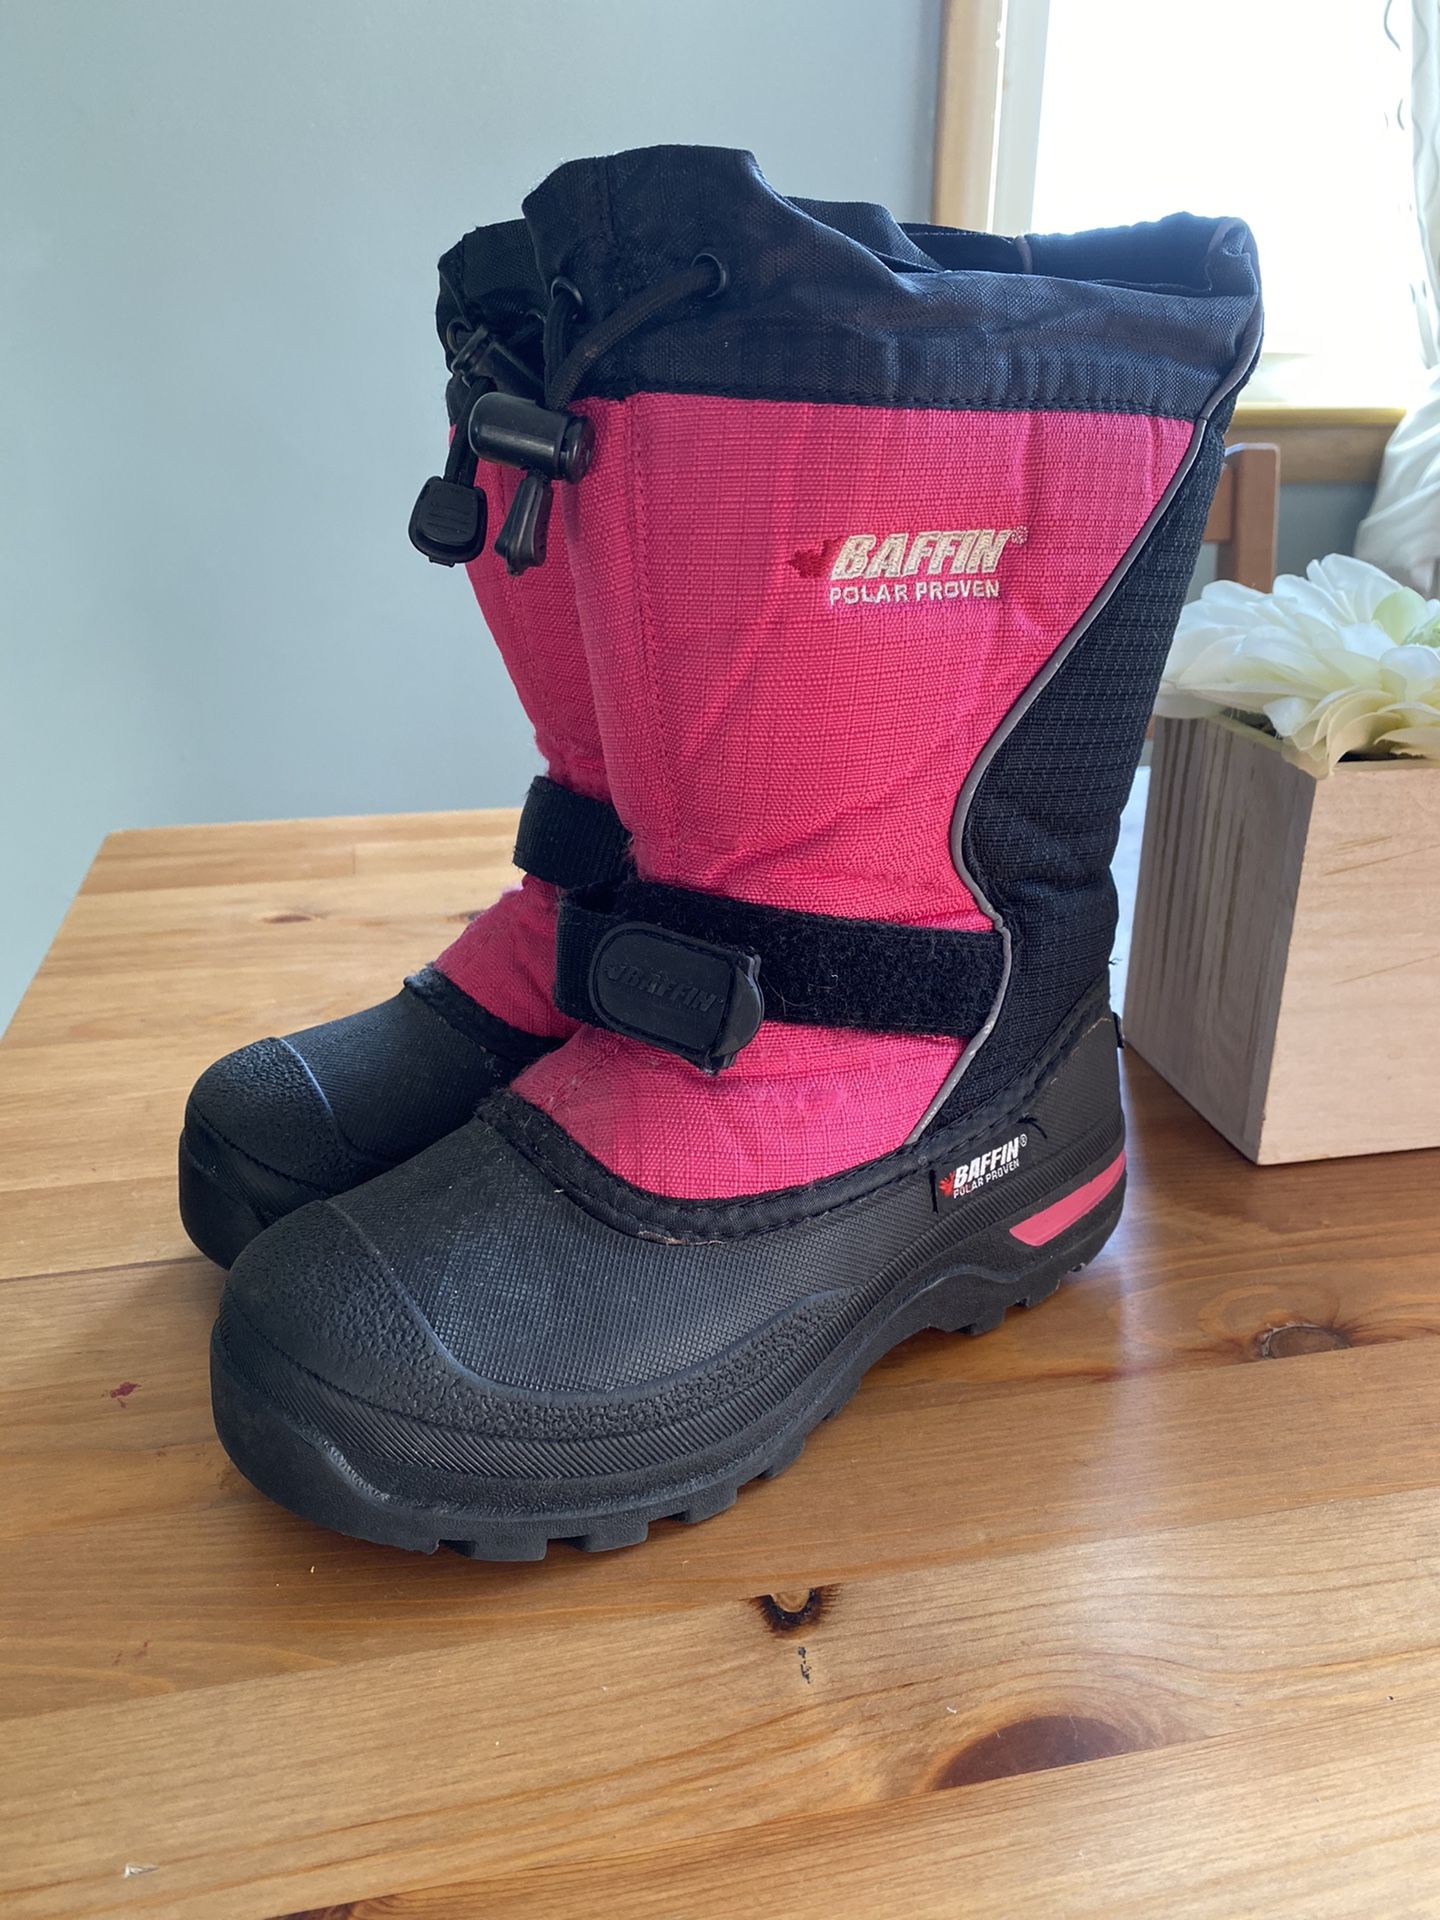 Girl’s size 2 winter boots